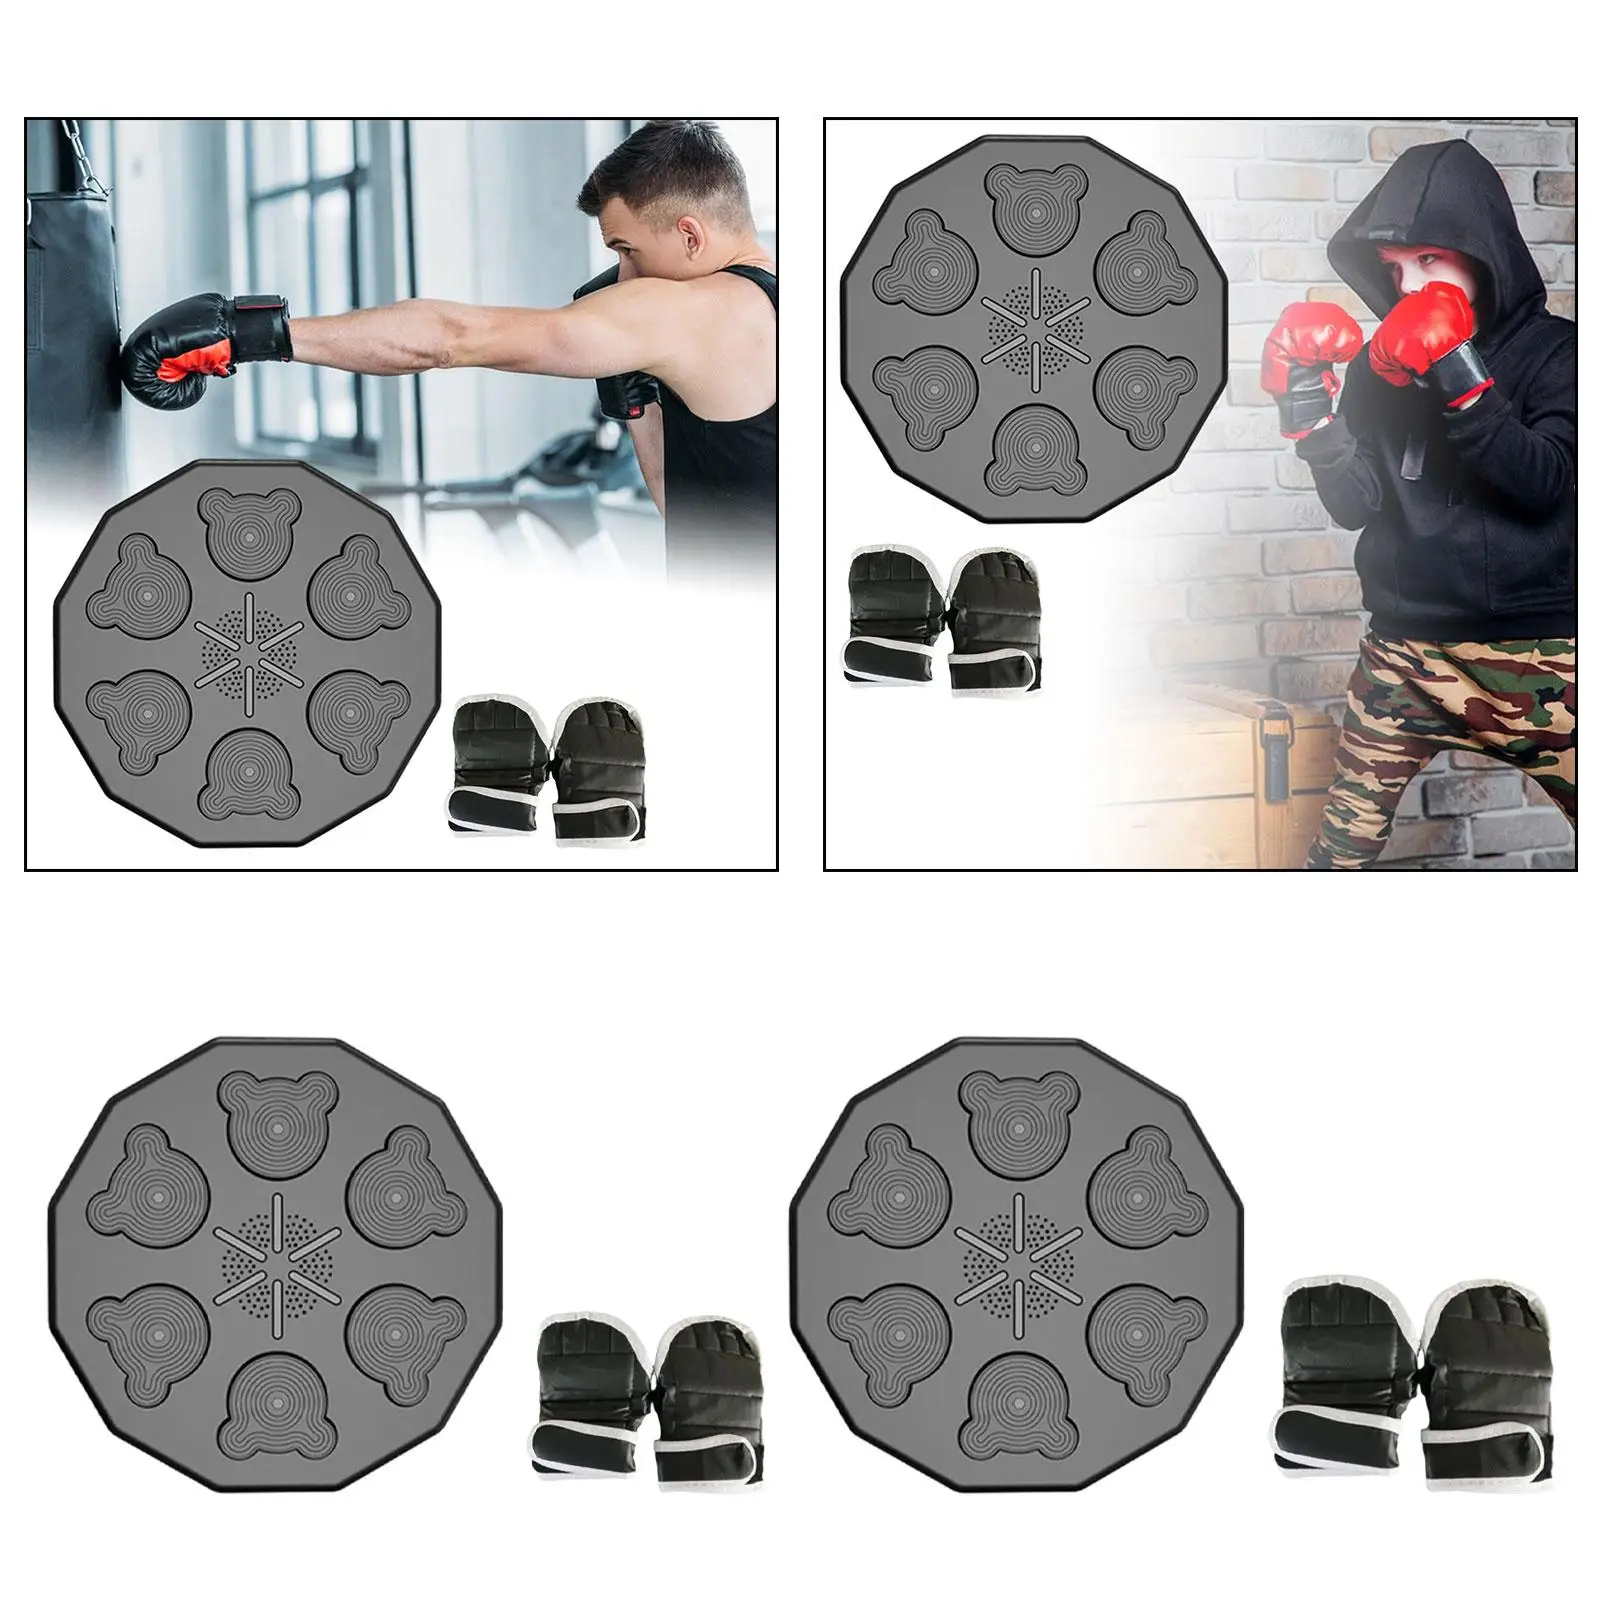 Music Boxing Training Equipment, RGB Lighted Punching Pad with Boxing Gloves,